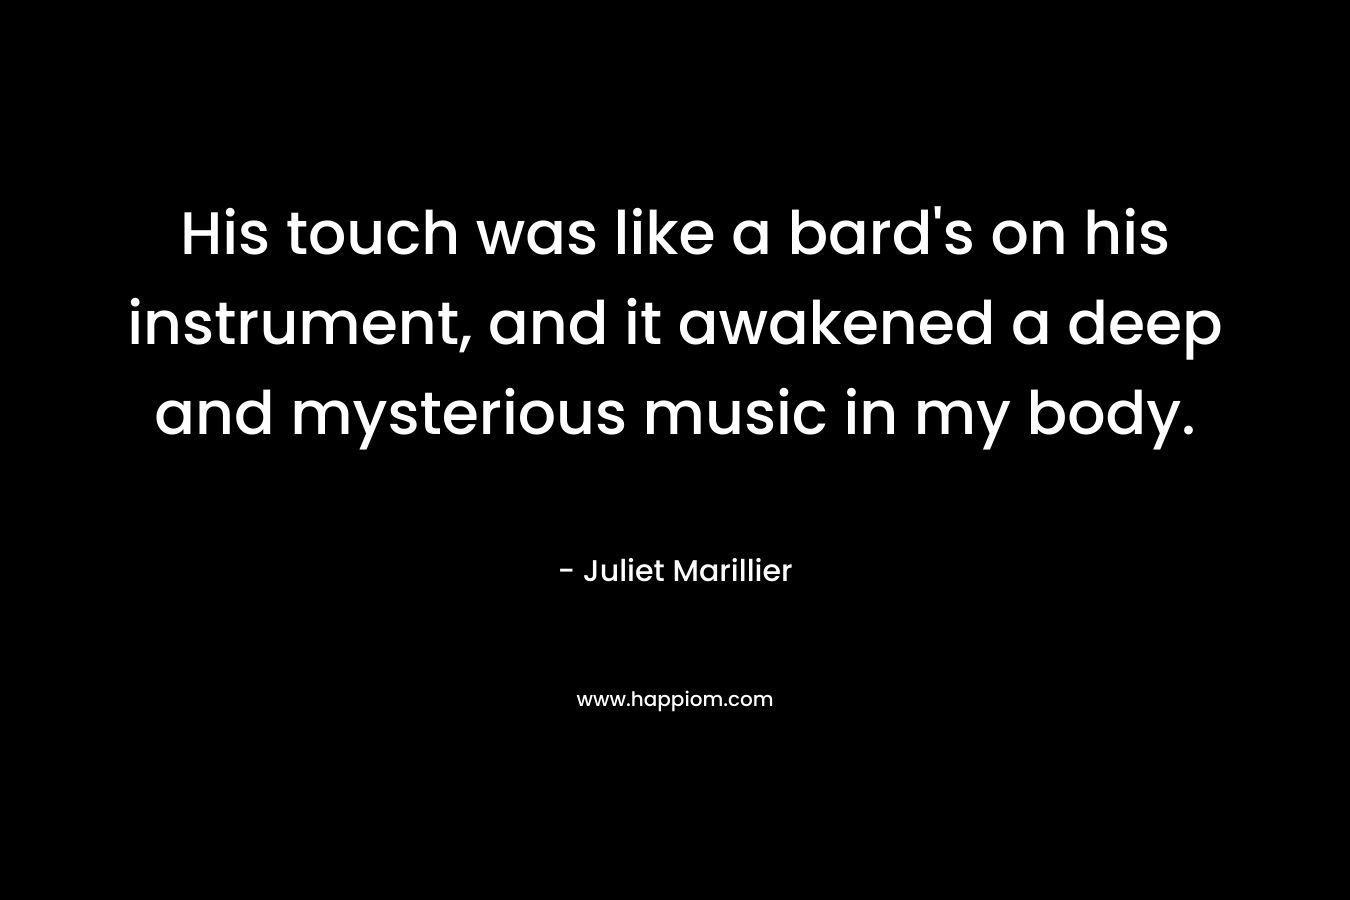 His touch was like a bard’s on his instrument, and it awakened a deep and mysterious music in my body. – Juliet Marillier